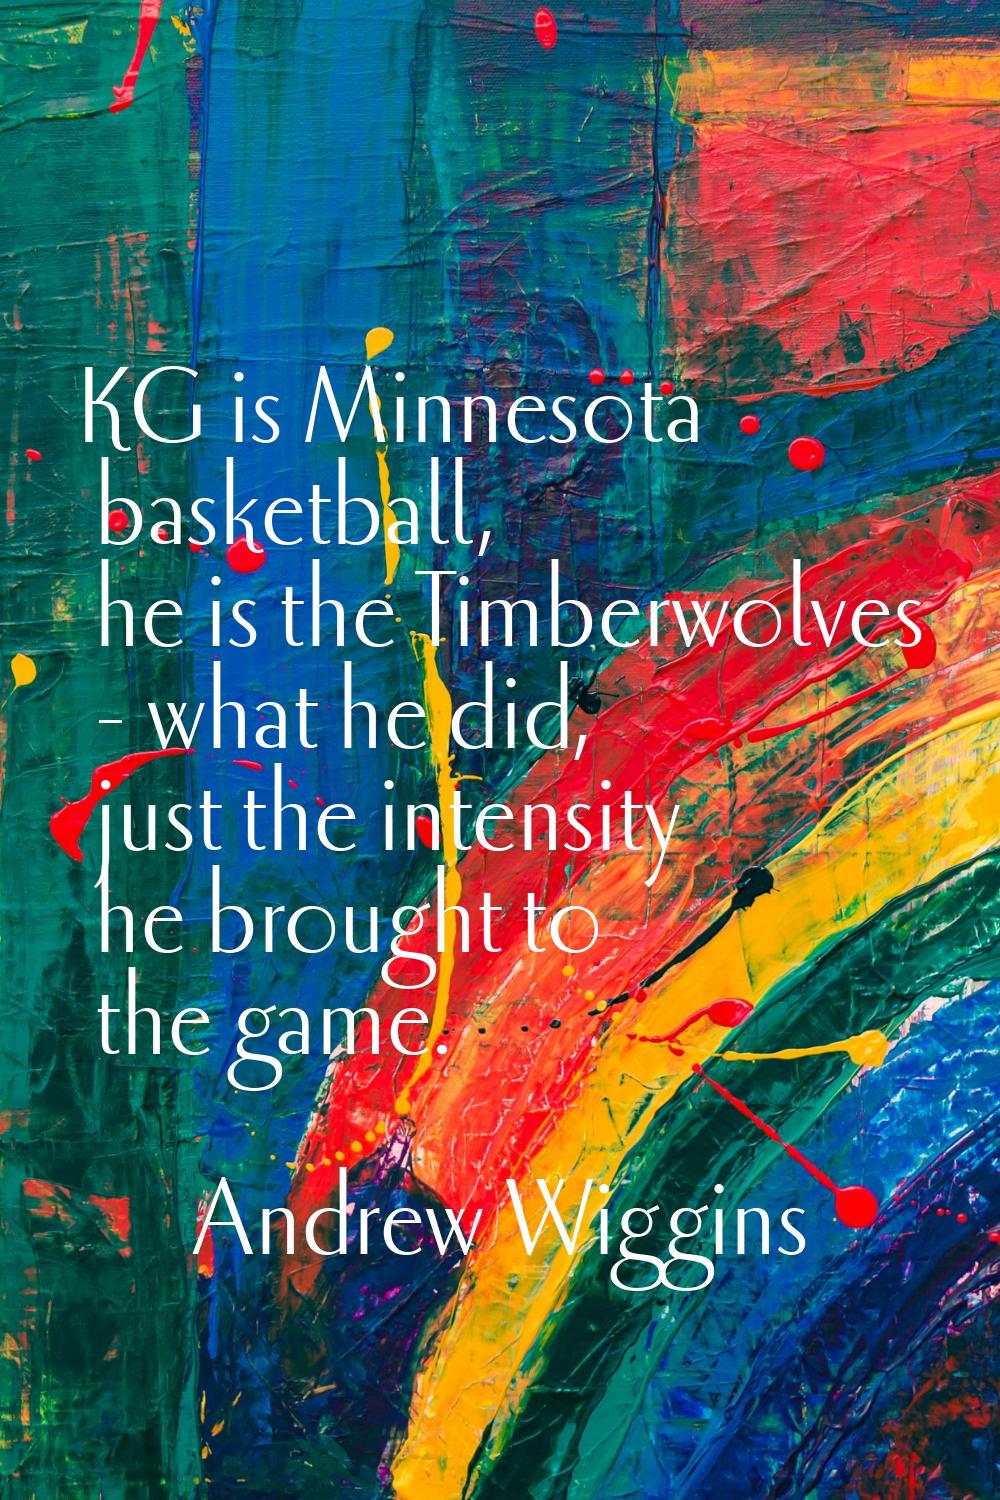 KG is Minnesota basketball, he is the Timberwolves - what he did, just the intensity he brought to 